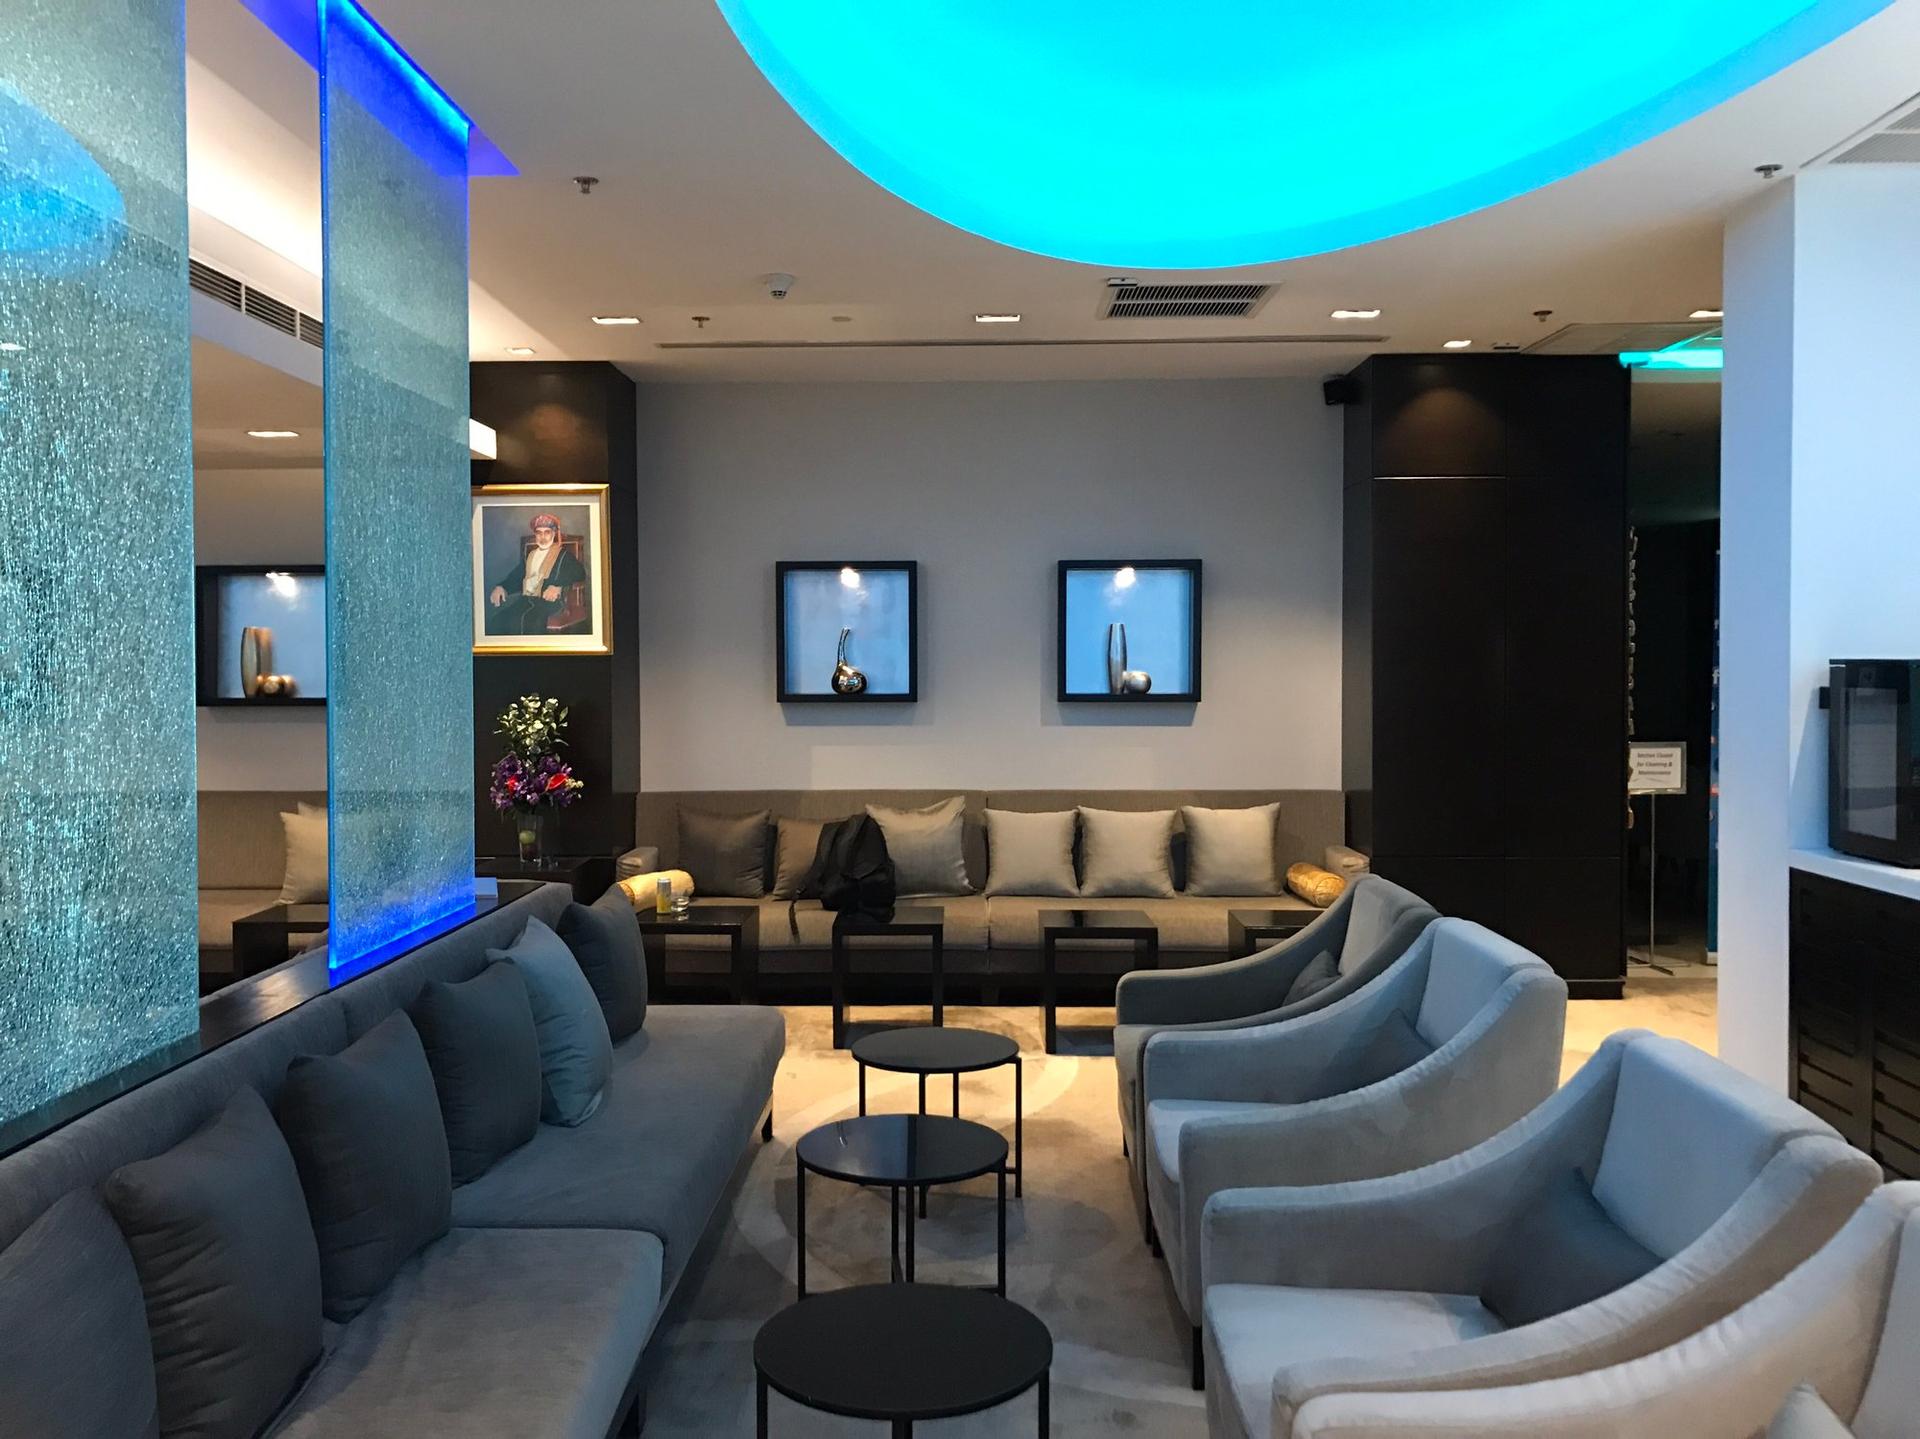 Oman Air First and Business Class Lounge image 4 of 50